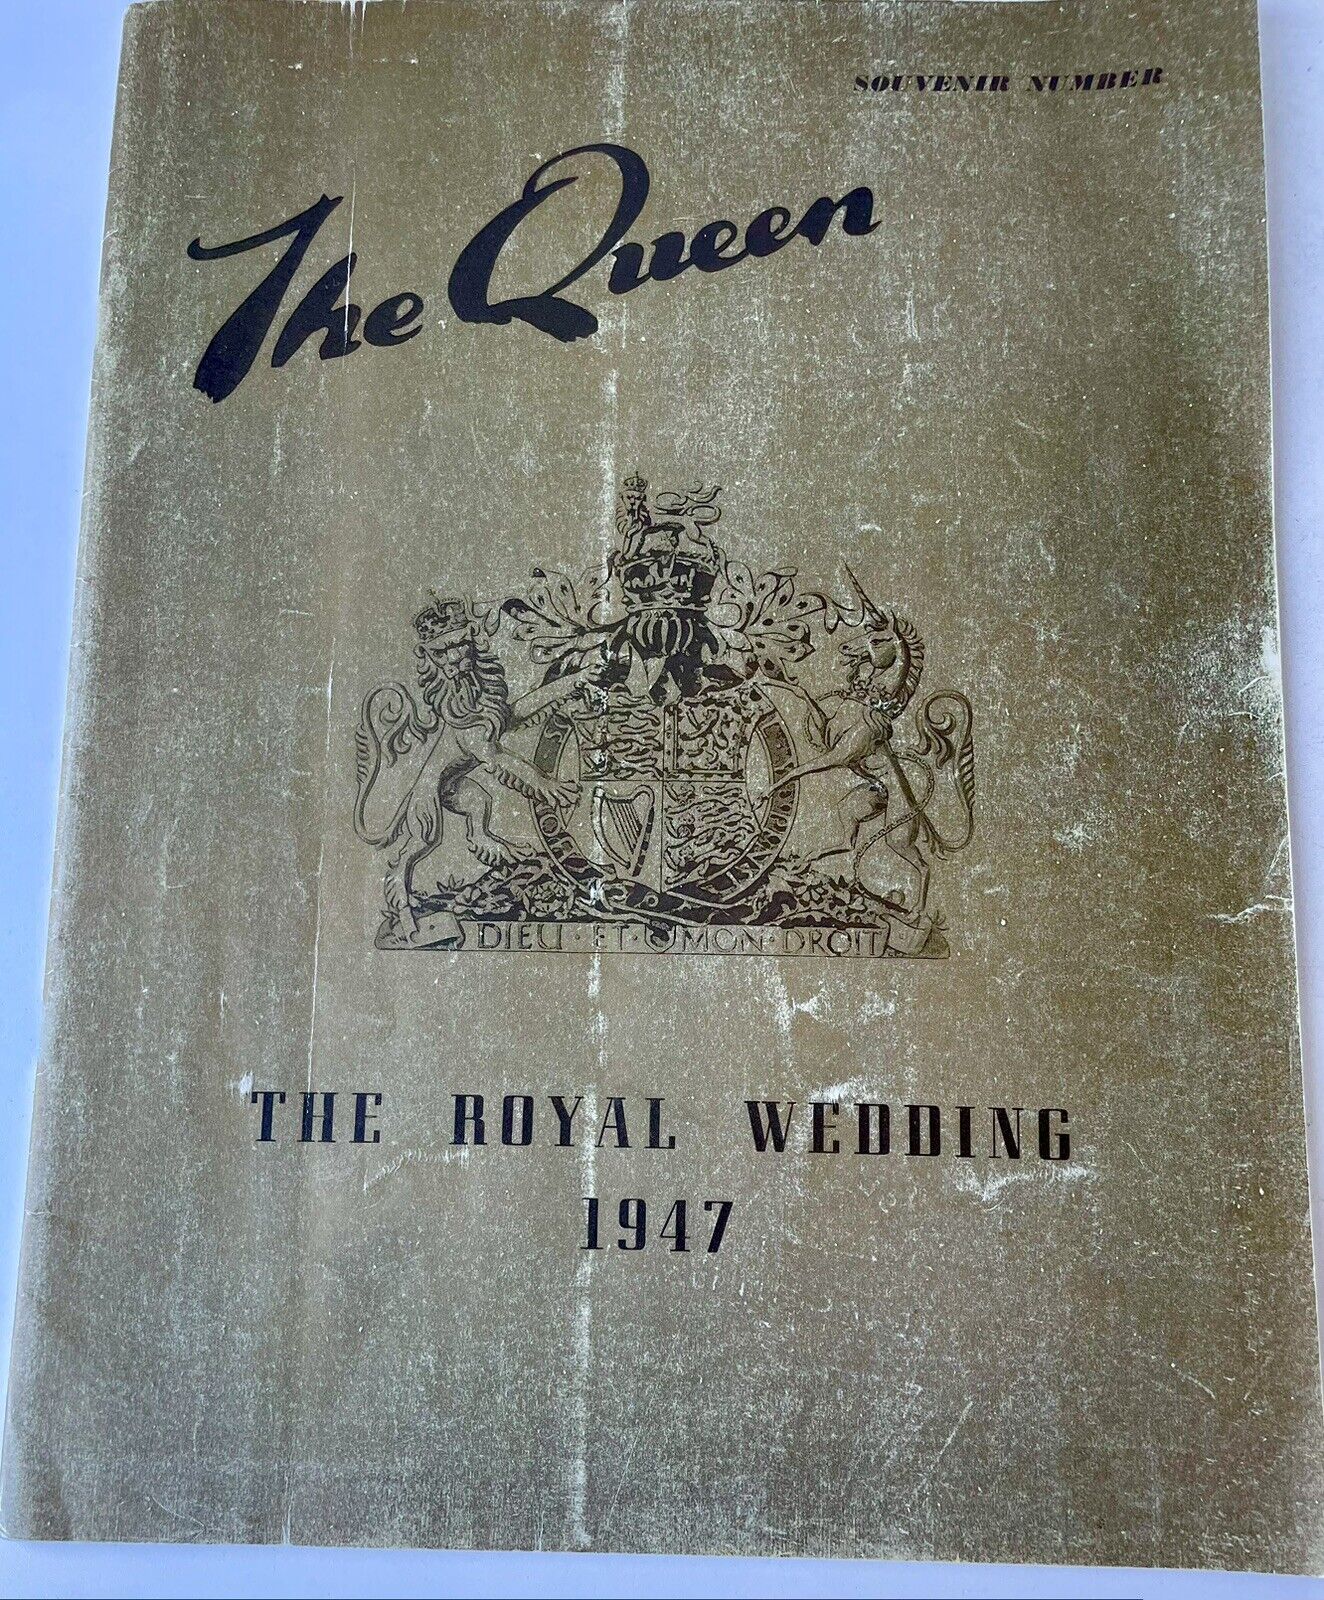 Vintage ‘The Queen’ The Royal Wedding 1947 Edition Magazine